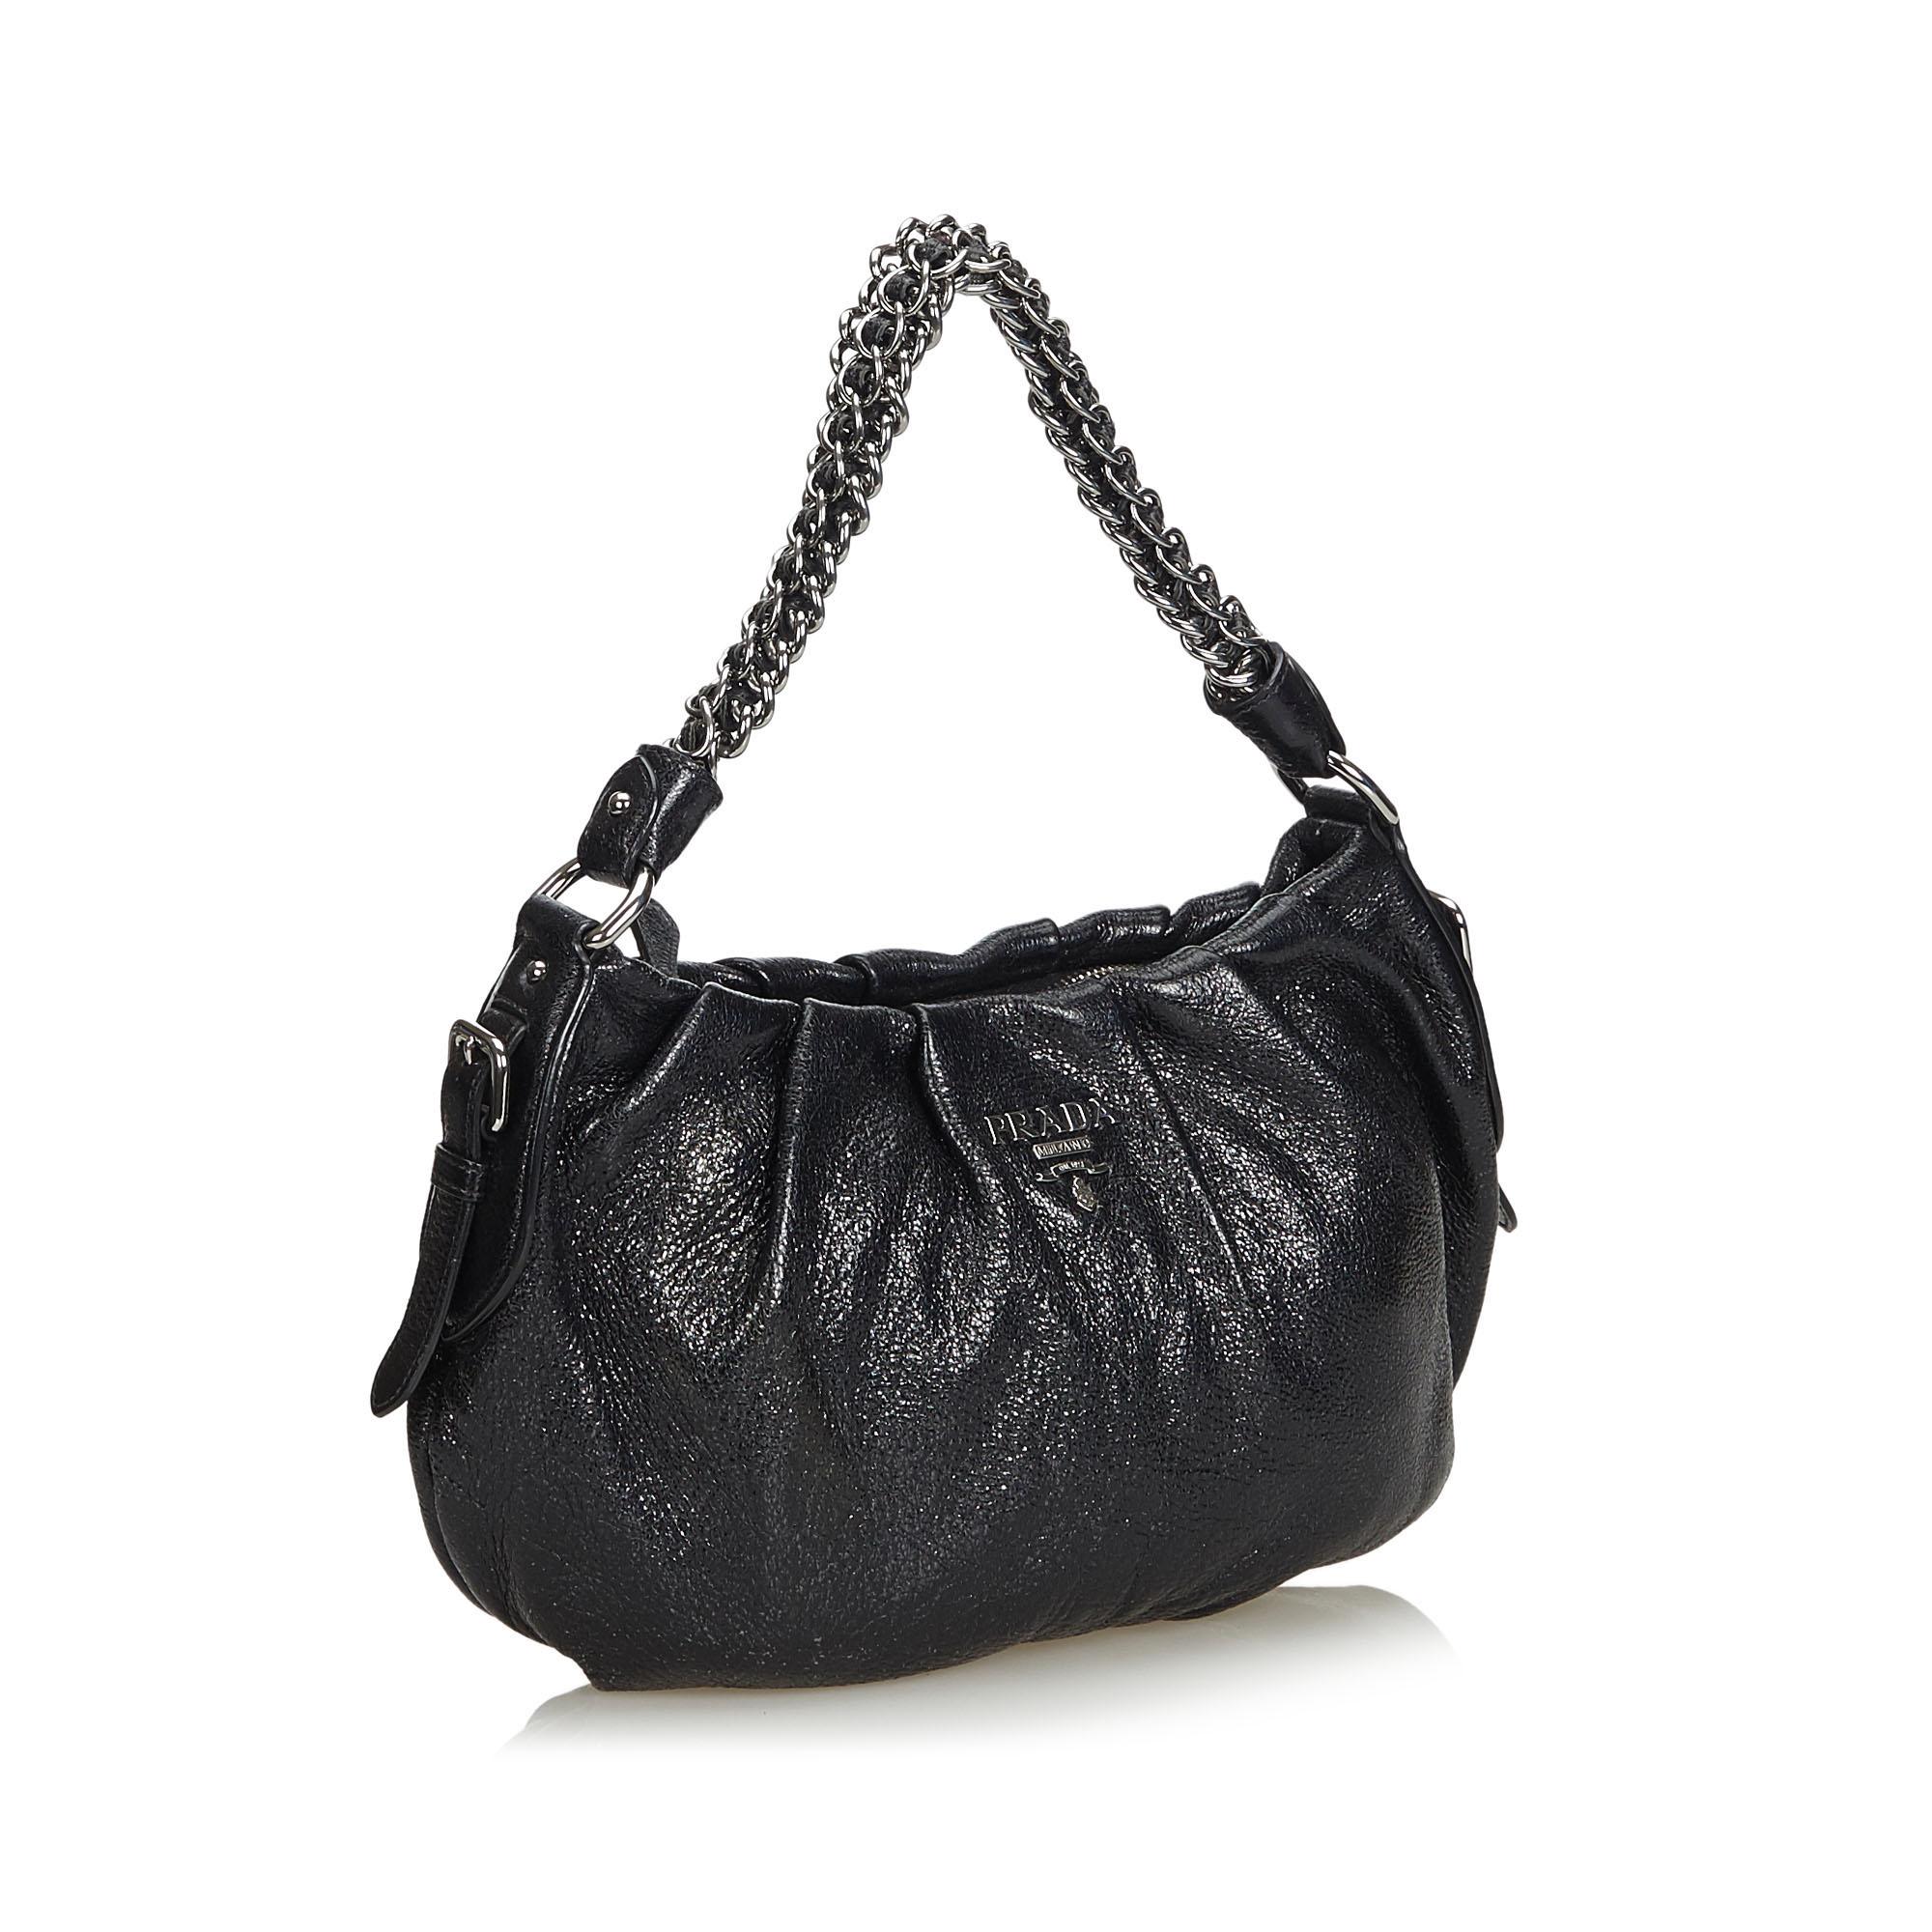 This shoulder bag features a leather body, a chain strap, a top zip closure, and an interior zip pocket. It carries as B+ condition rating.

Inclusions: 
Authenticity Card

Dimensions:
Length: 22.00 cm
Width: 32.00 cm
Depth: 3.50 cm
Shoulder Drop: